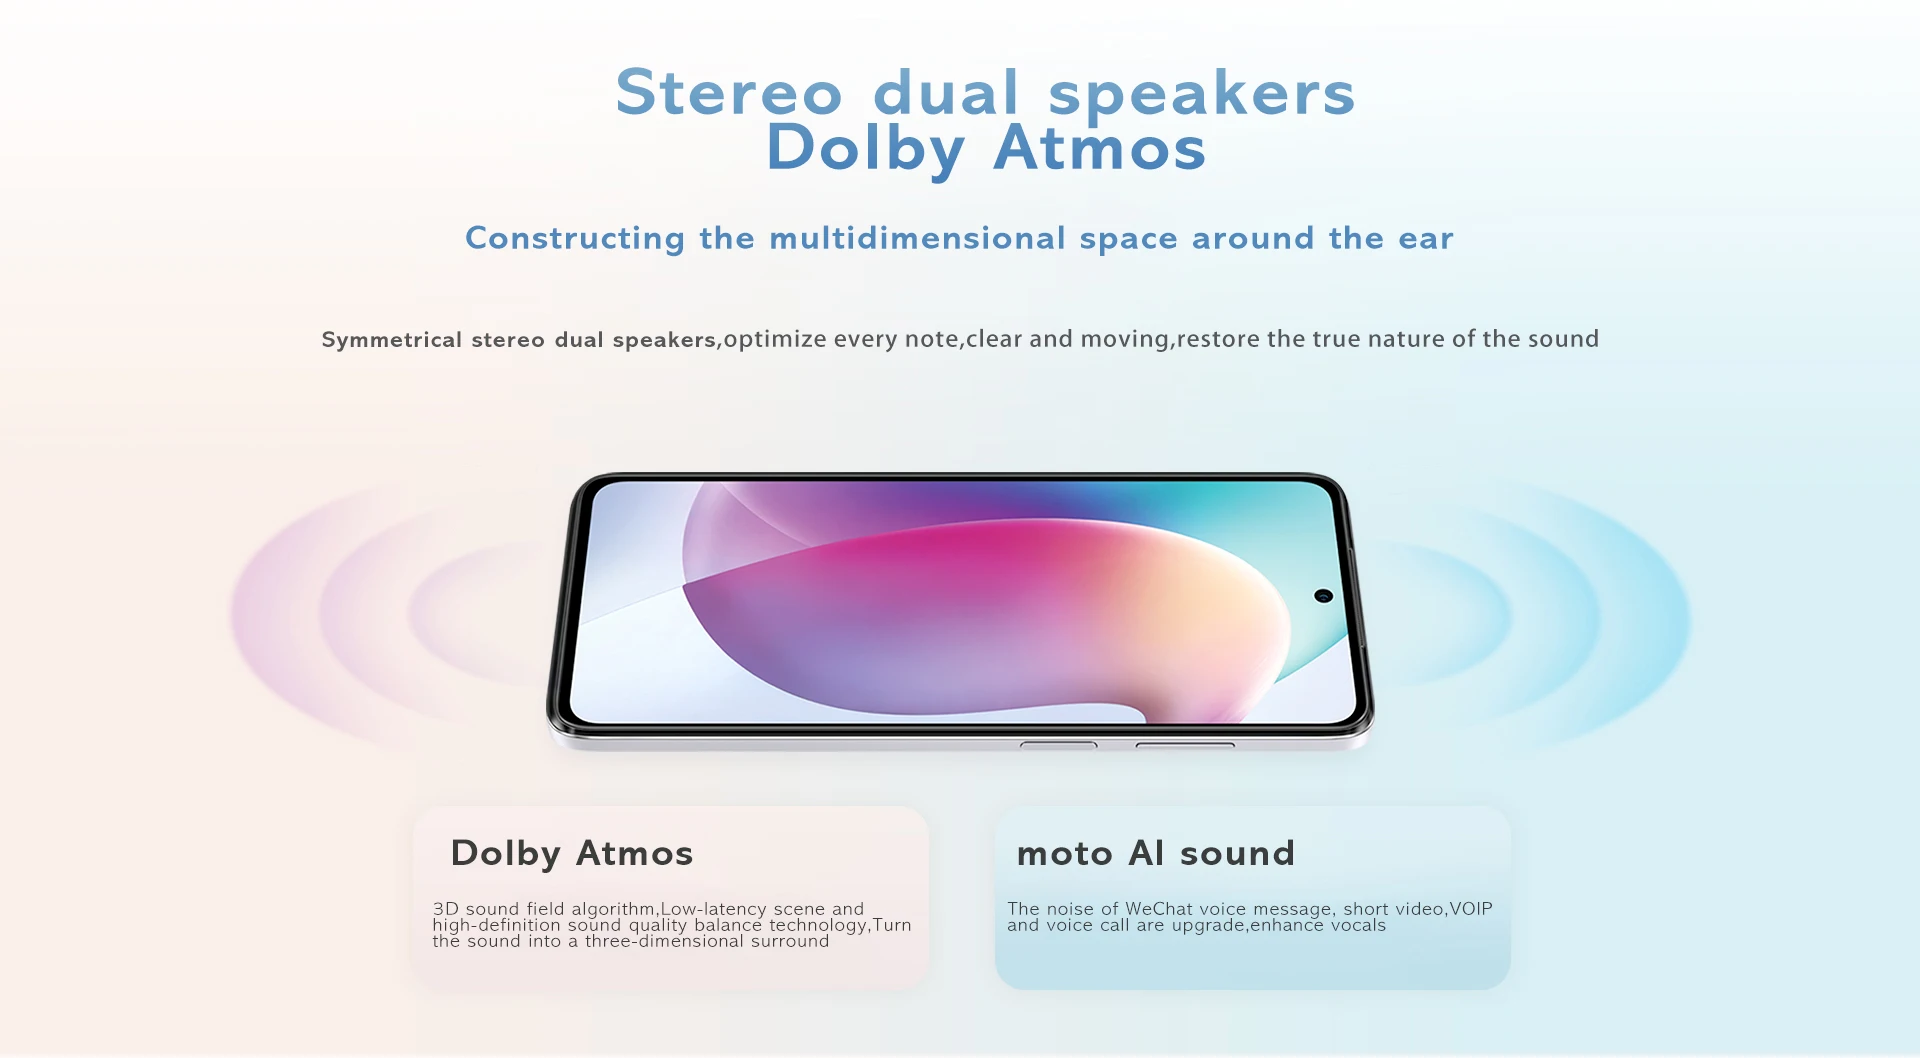 Smartphone with Stereo dual speakers